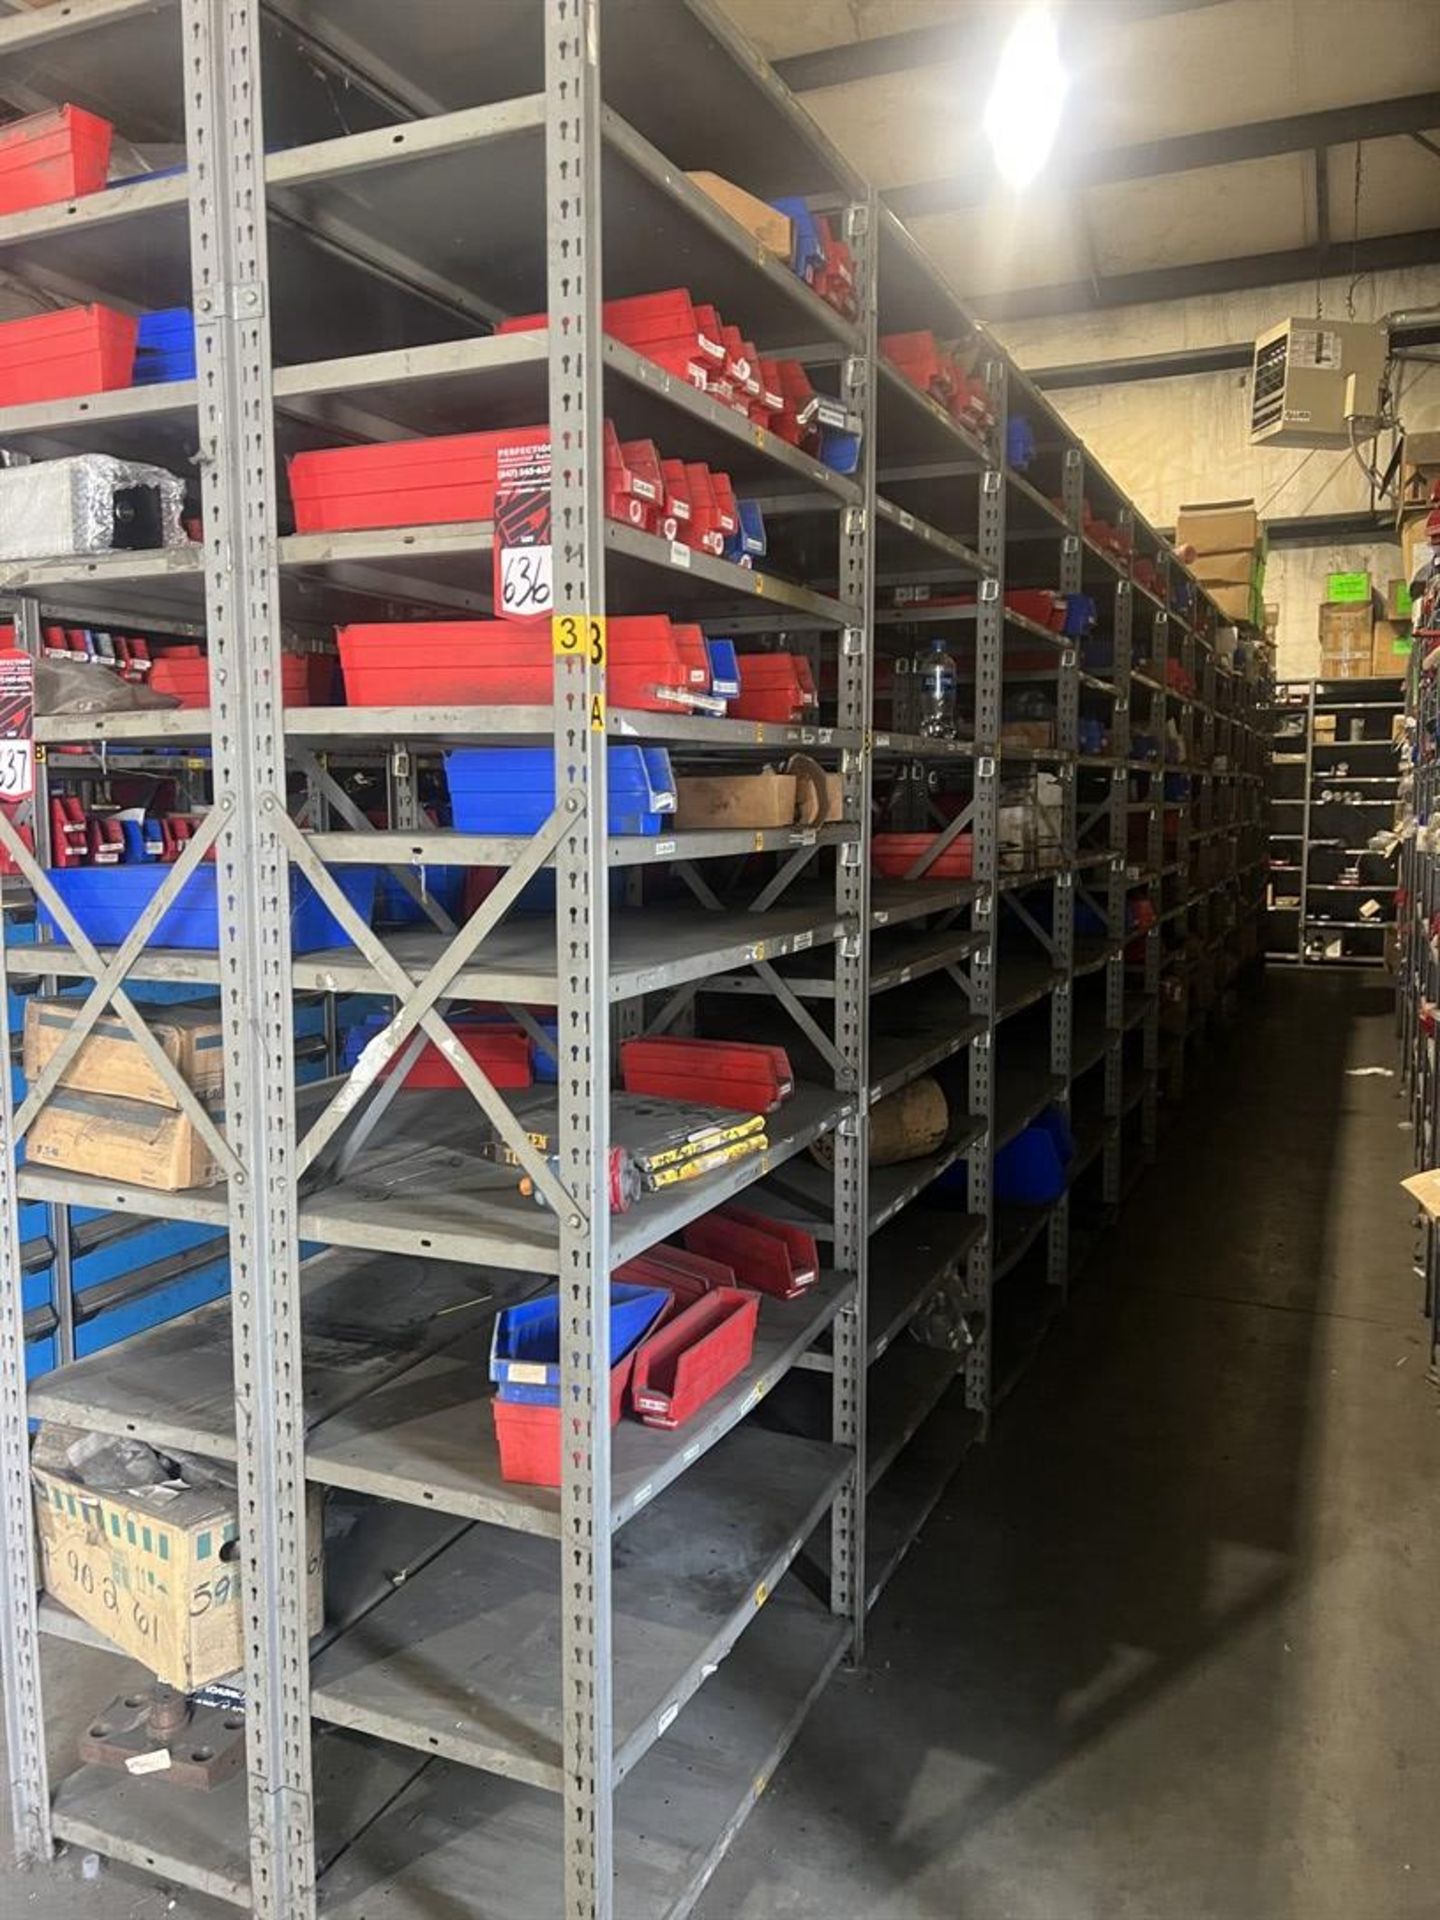 Lot Comprising (12) Shop Shelving Units w/ Contents Including Wheelabrator and Conveyor Components